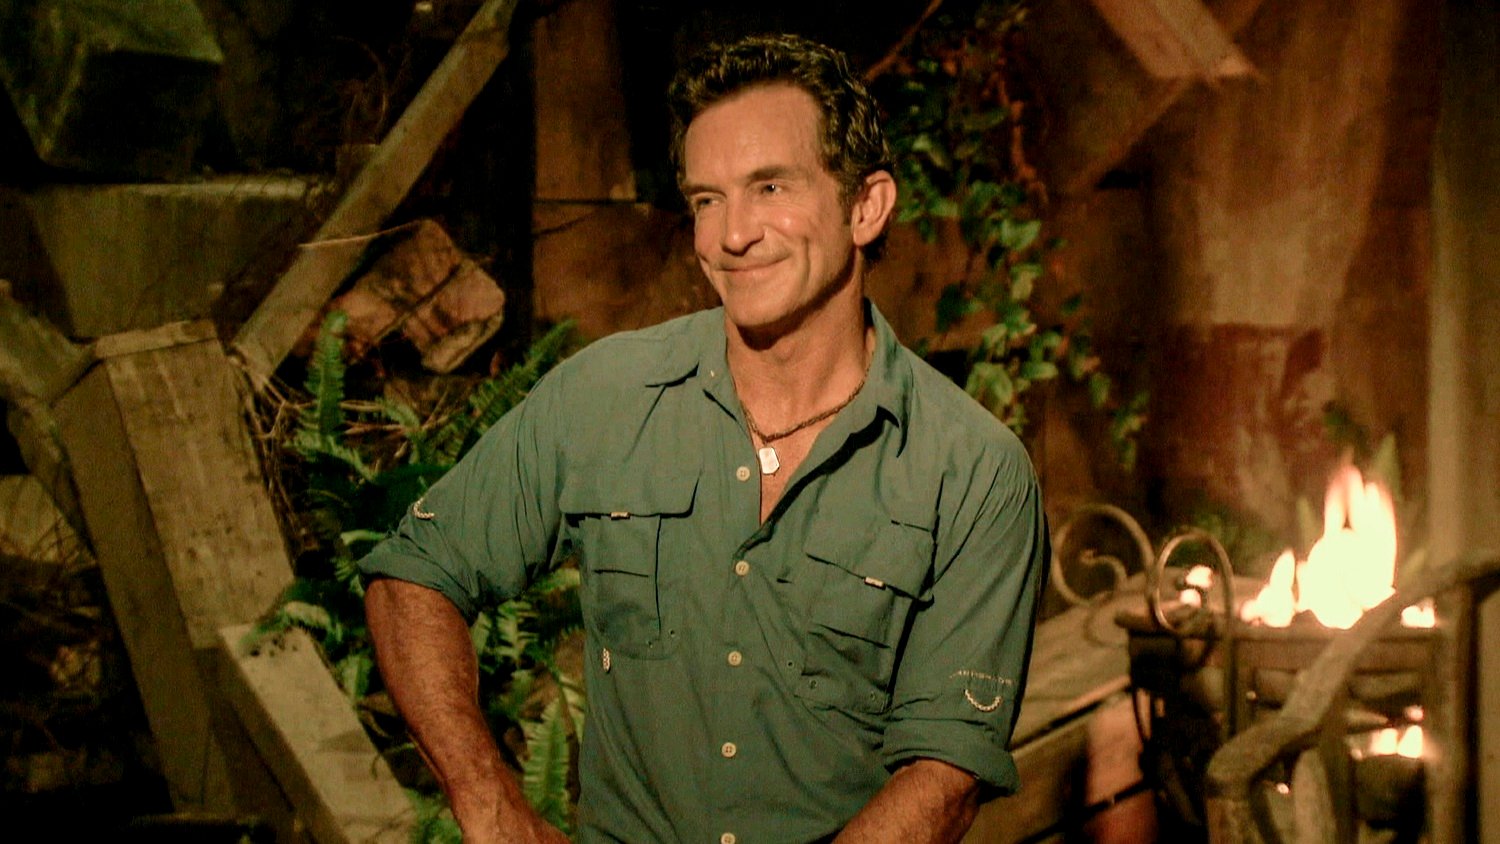 Jeff Probst, host of 'Survivor 41' sits and smiles during tribal council